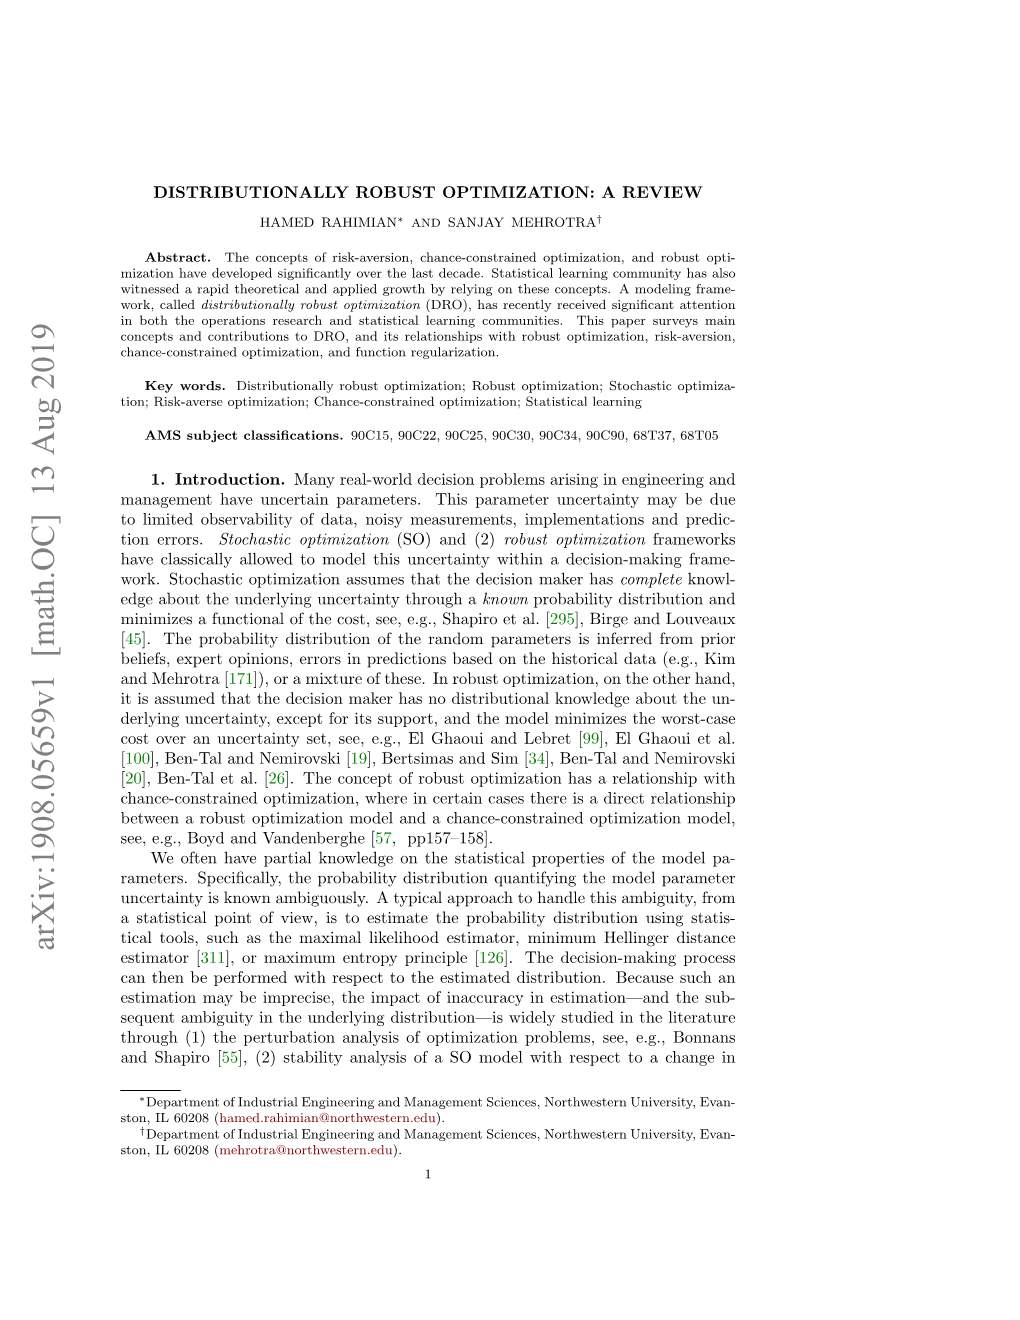 Distributionally Robust Optimization: a Review